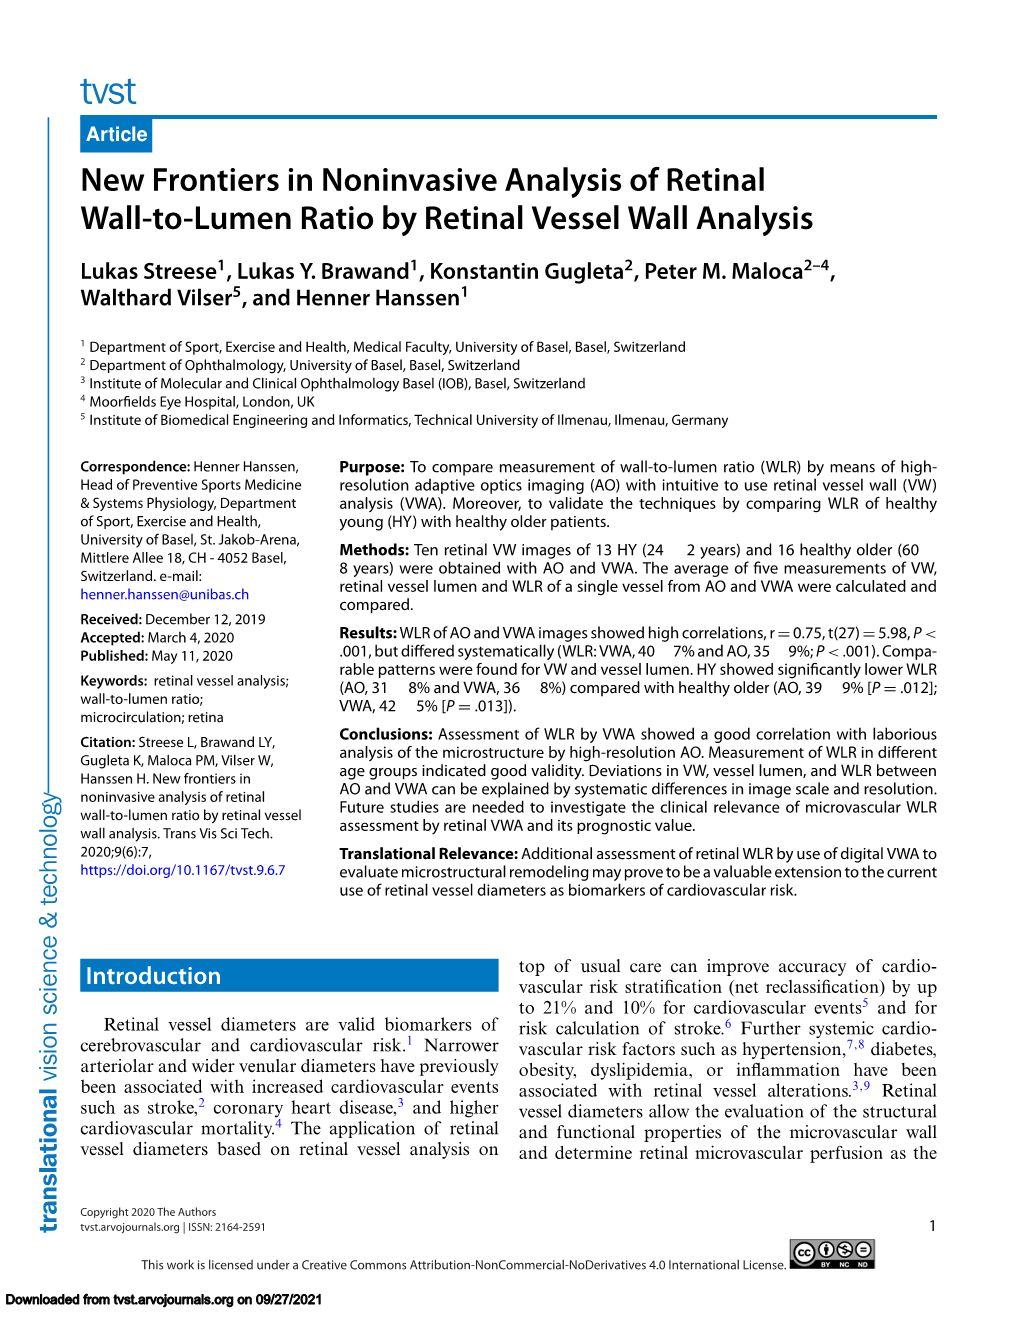 New Frontiers in Noninvasive Analysis of Retinal Wall-To-Lumen Ratio by Retinal Vessel Wall Analysis